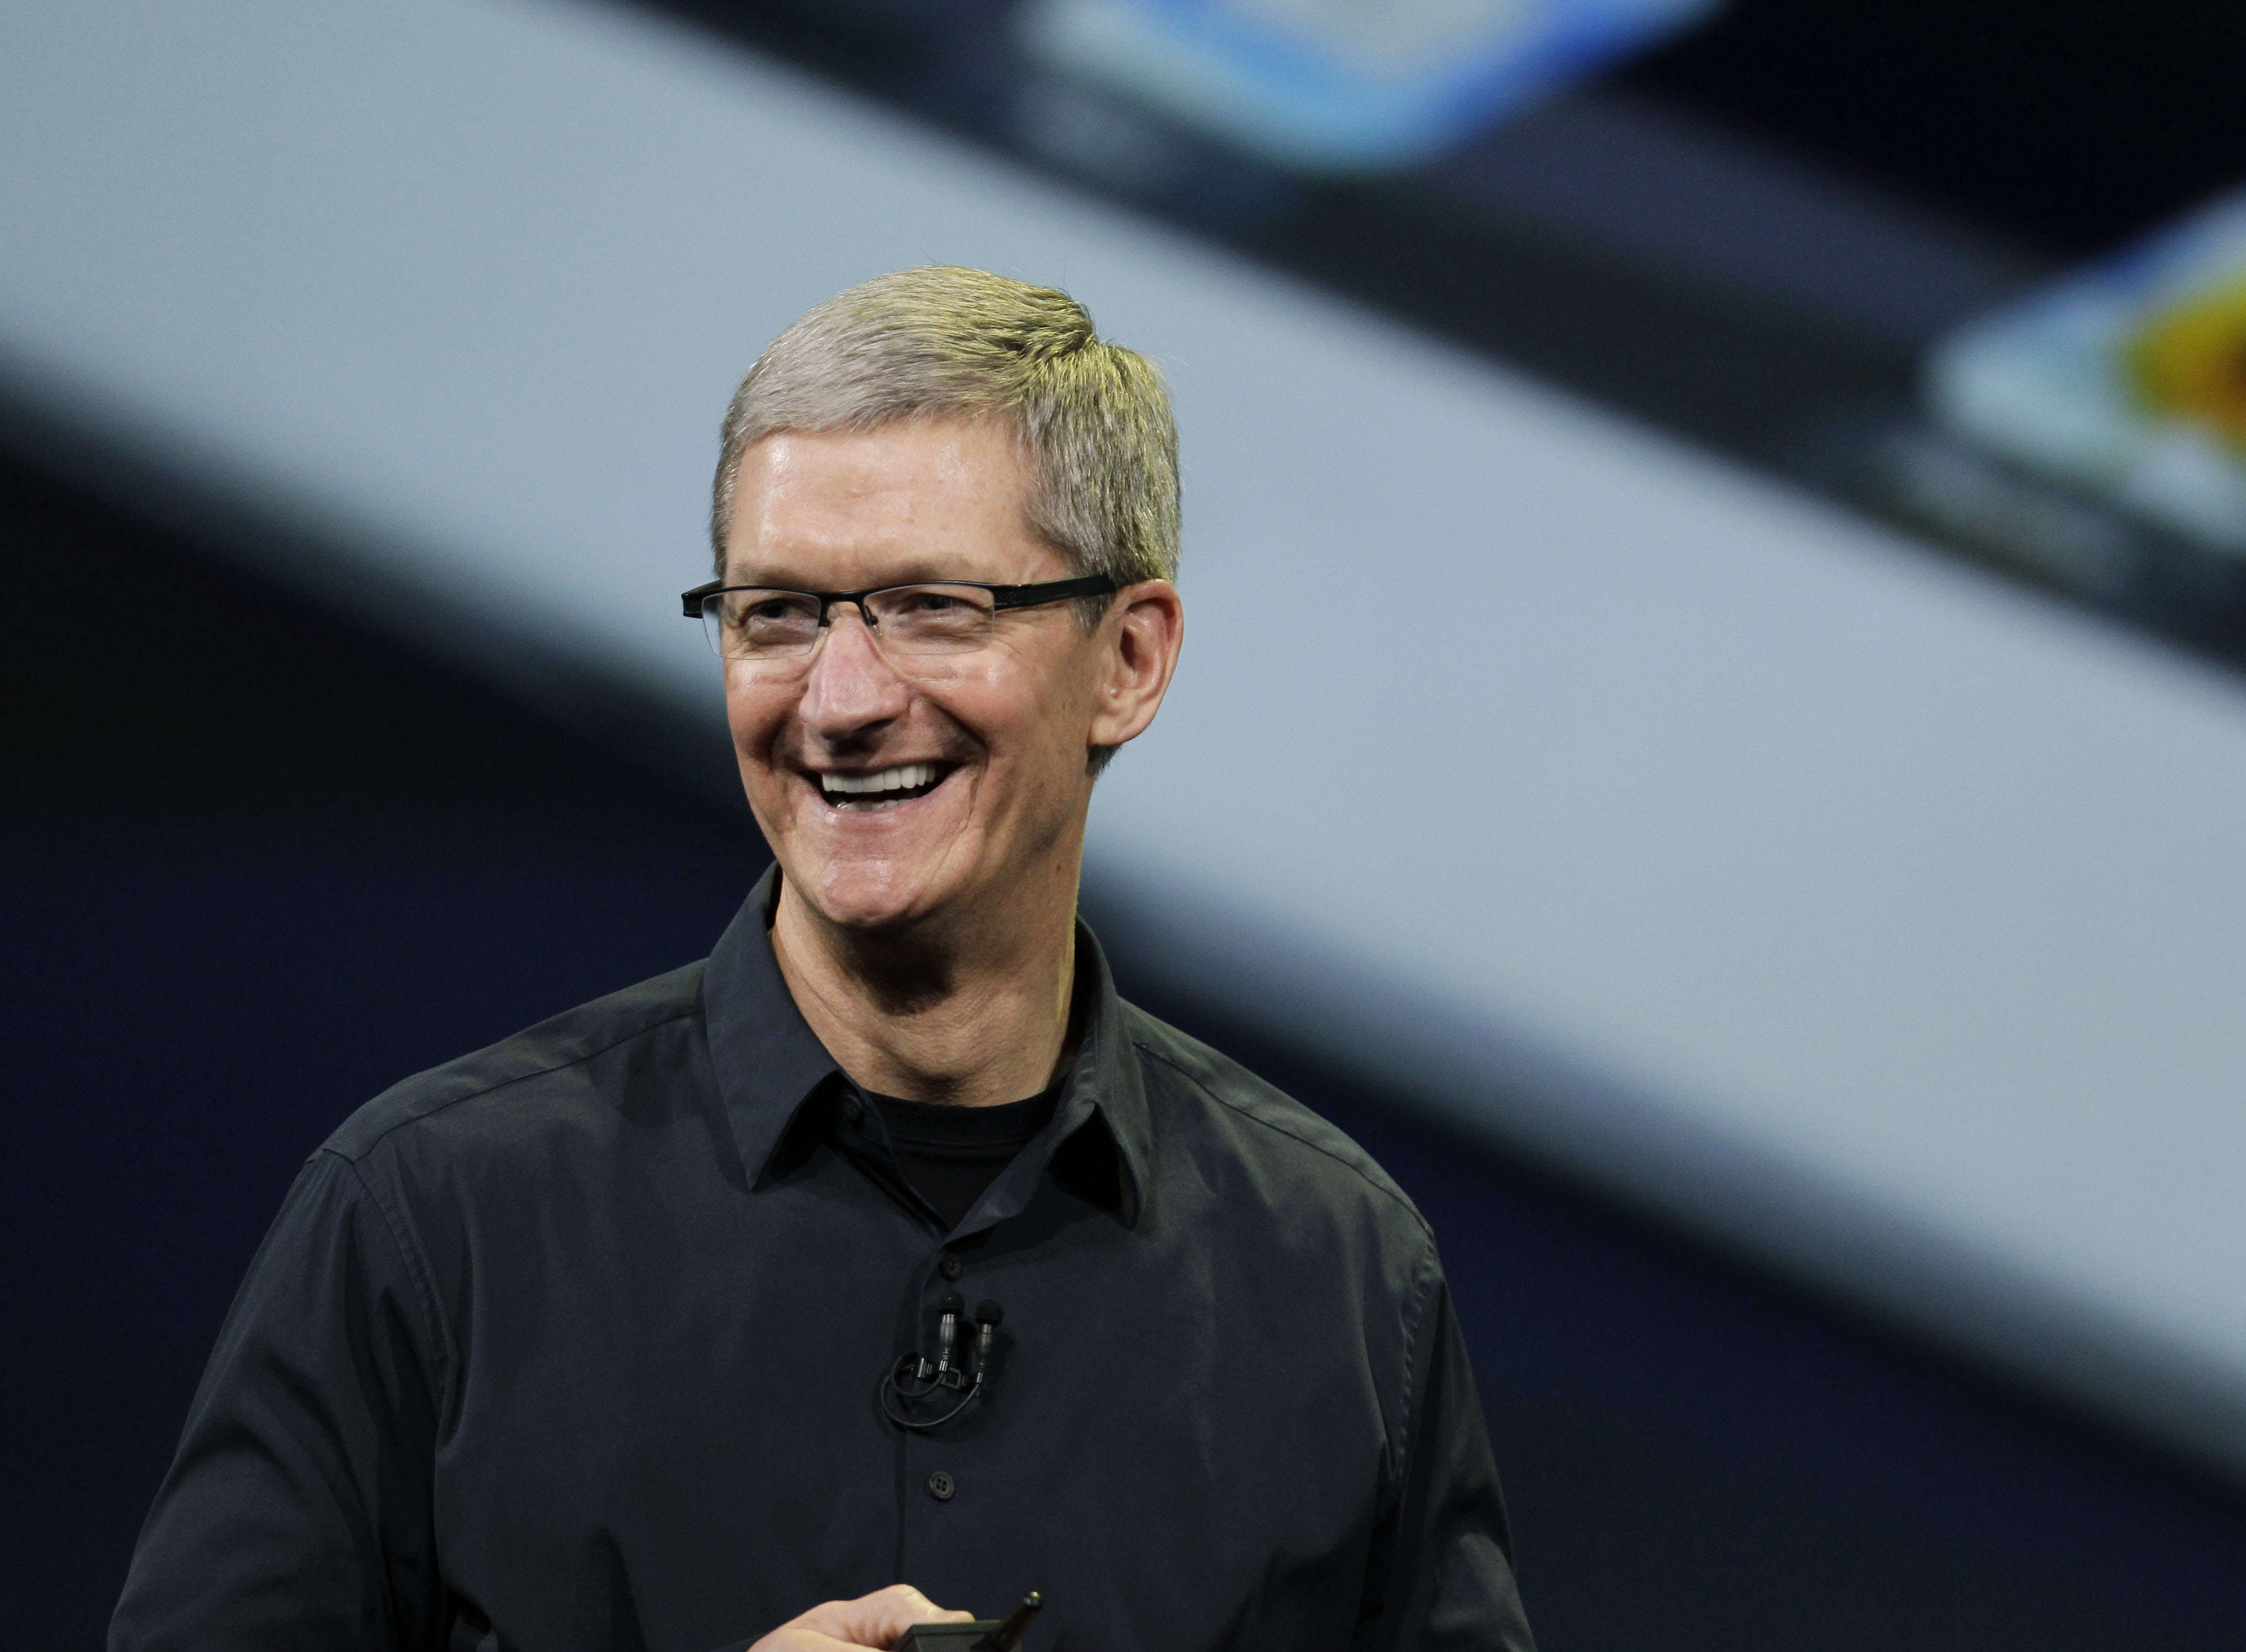  - apple-ceo-tim-cook-emerges-from-steve-jobs-shadow-1